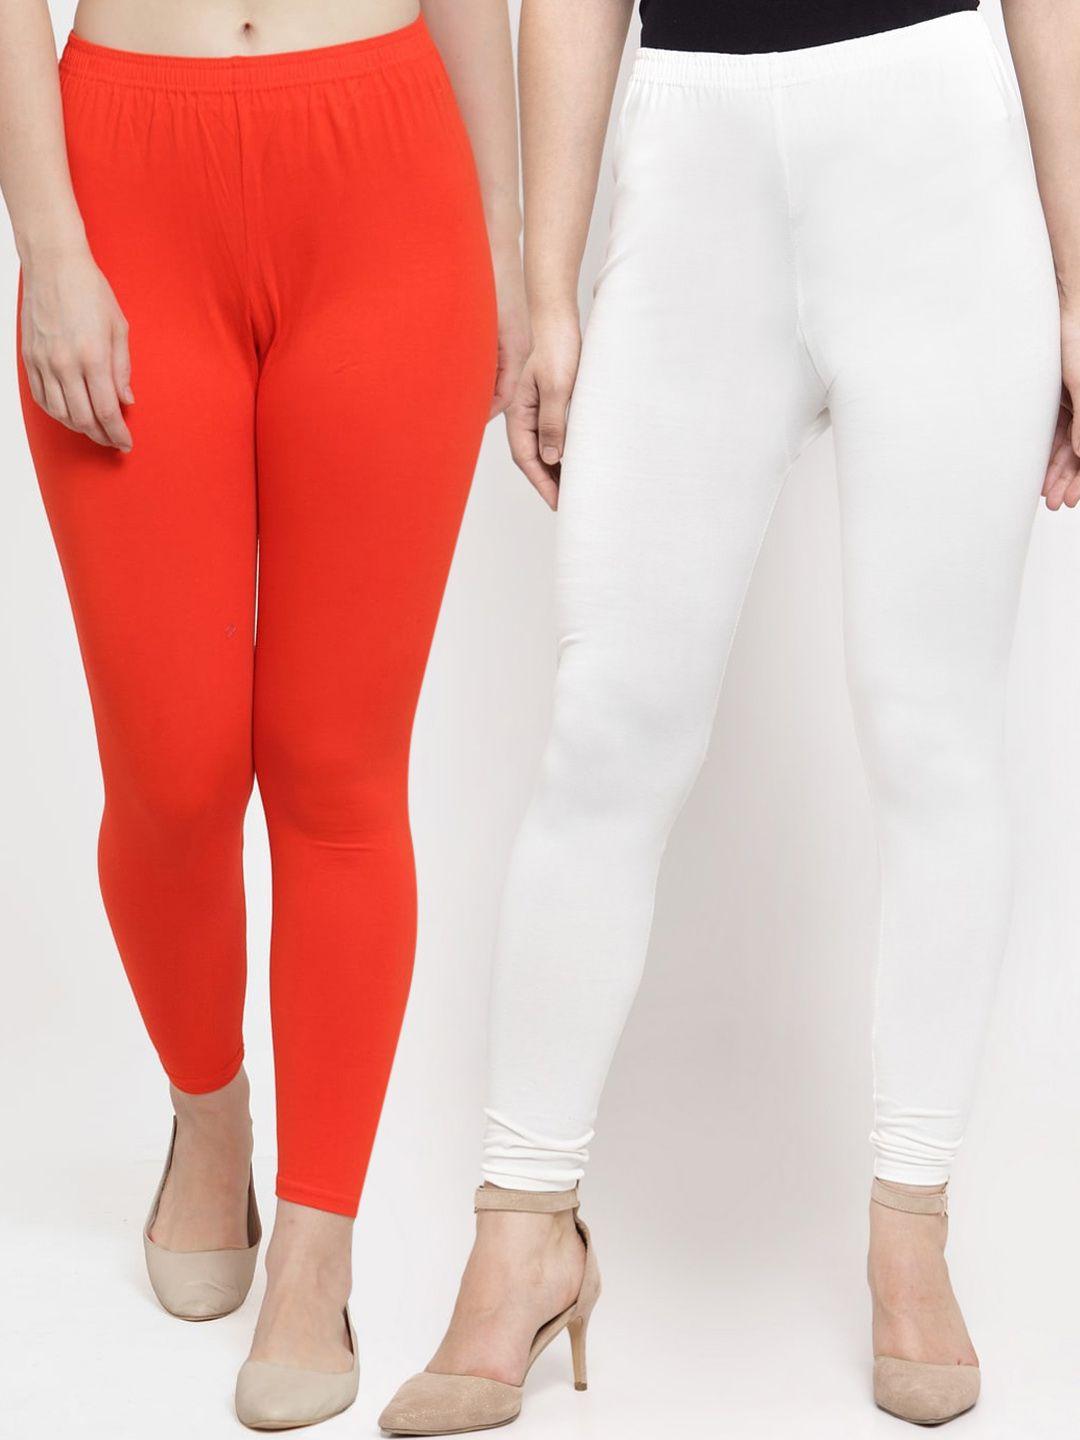 GRACIT Women Pack Of 2 White & Orange Colored Solid Ankle Length Leggings